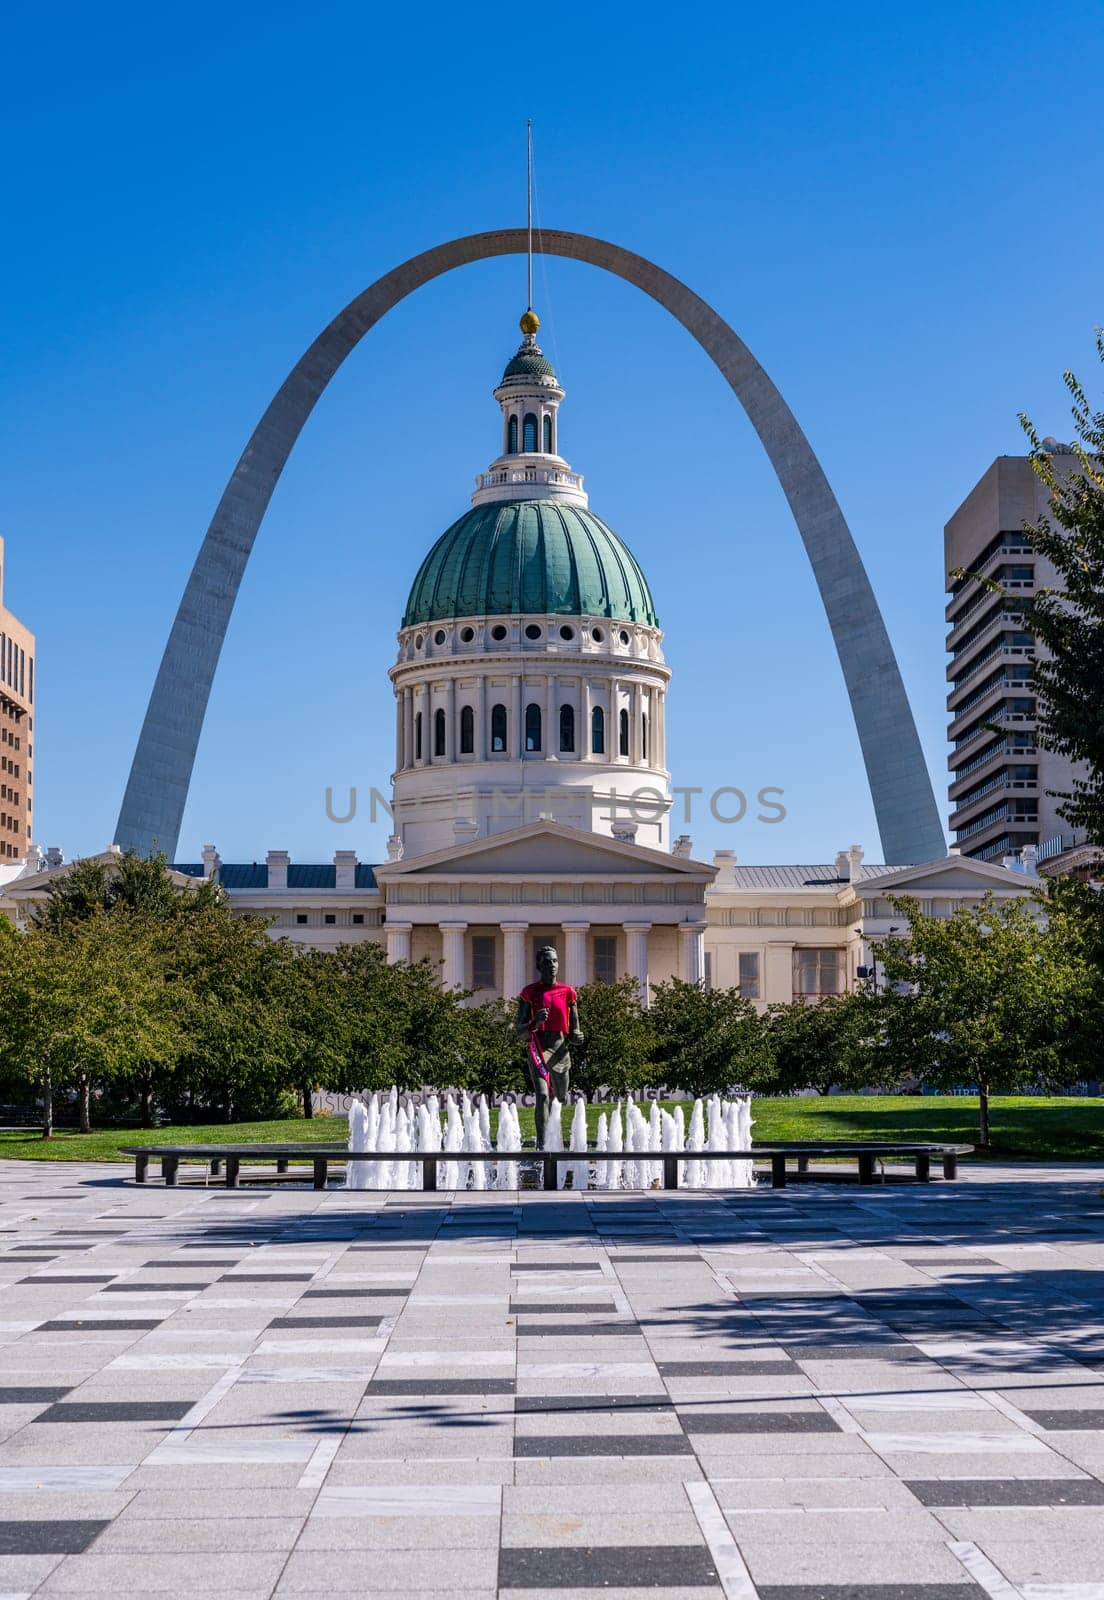 Dome of Old Courthouse in St Louis Missouri with statue in fountain by steheap